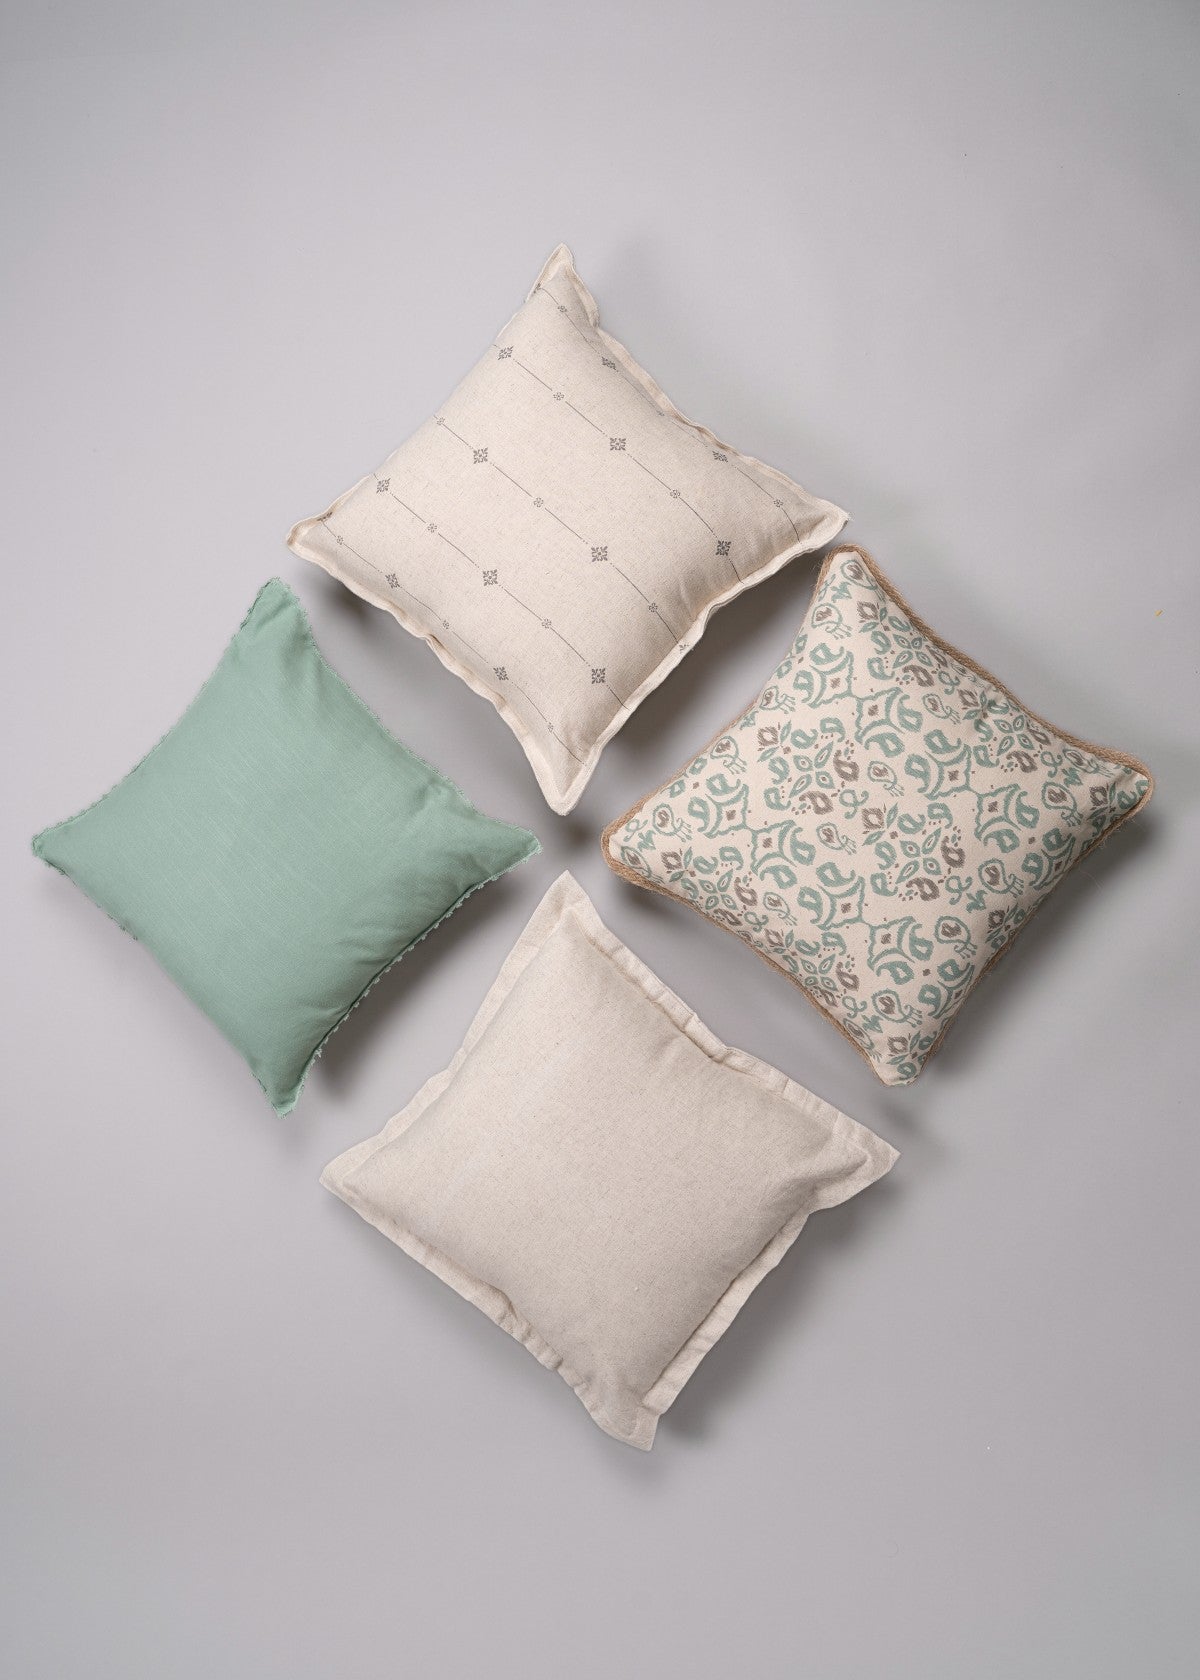 Tulsi, Spice Route, Sage Green, Solid Linen Set Of 4 Combo Cotton Cushion Cover 16" - Sage Green And Beige